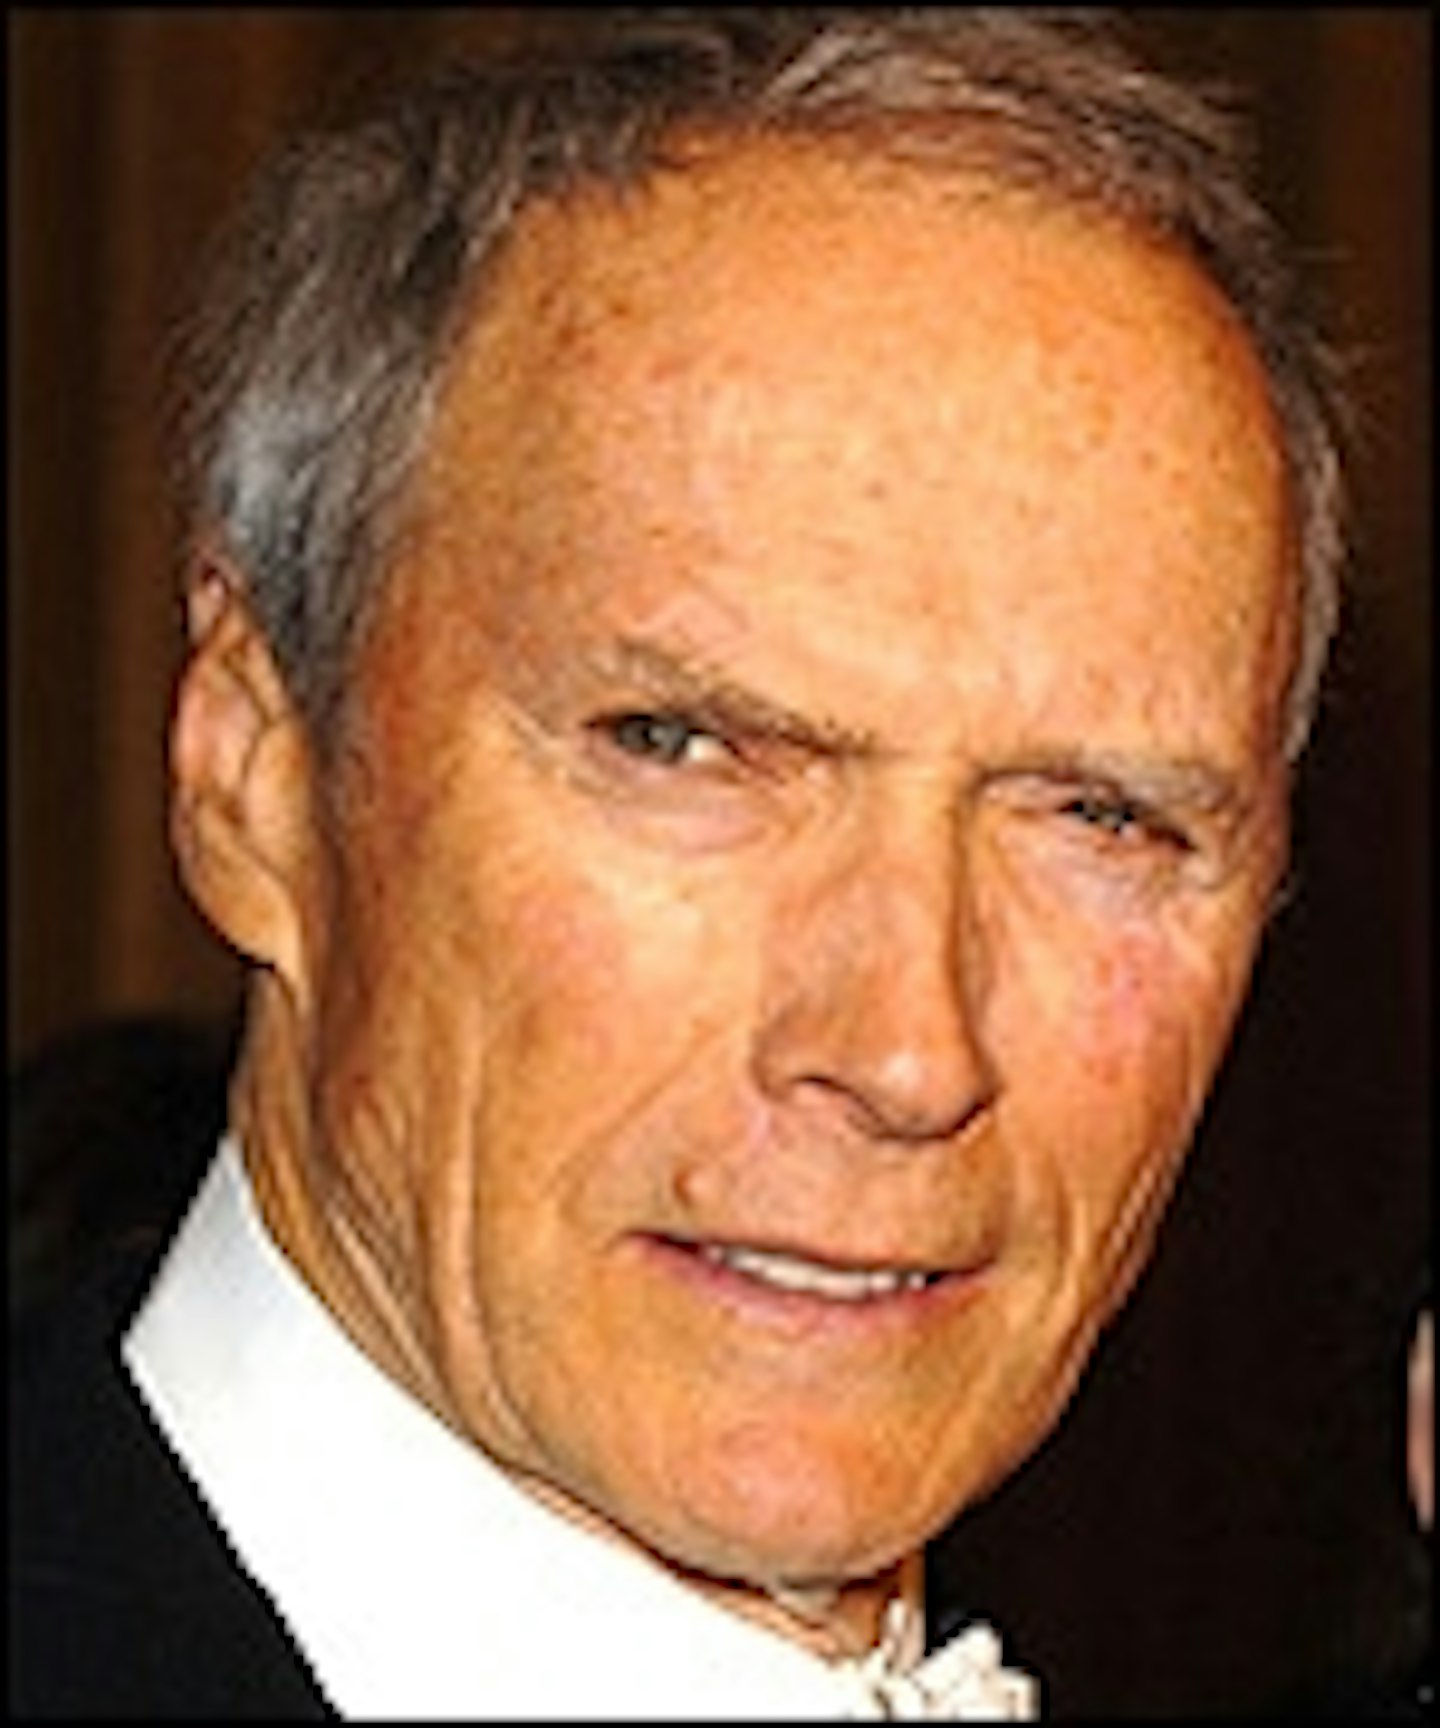 The Far Eastwood